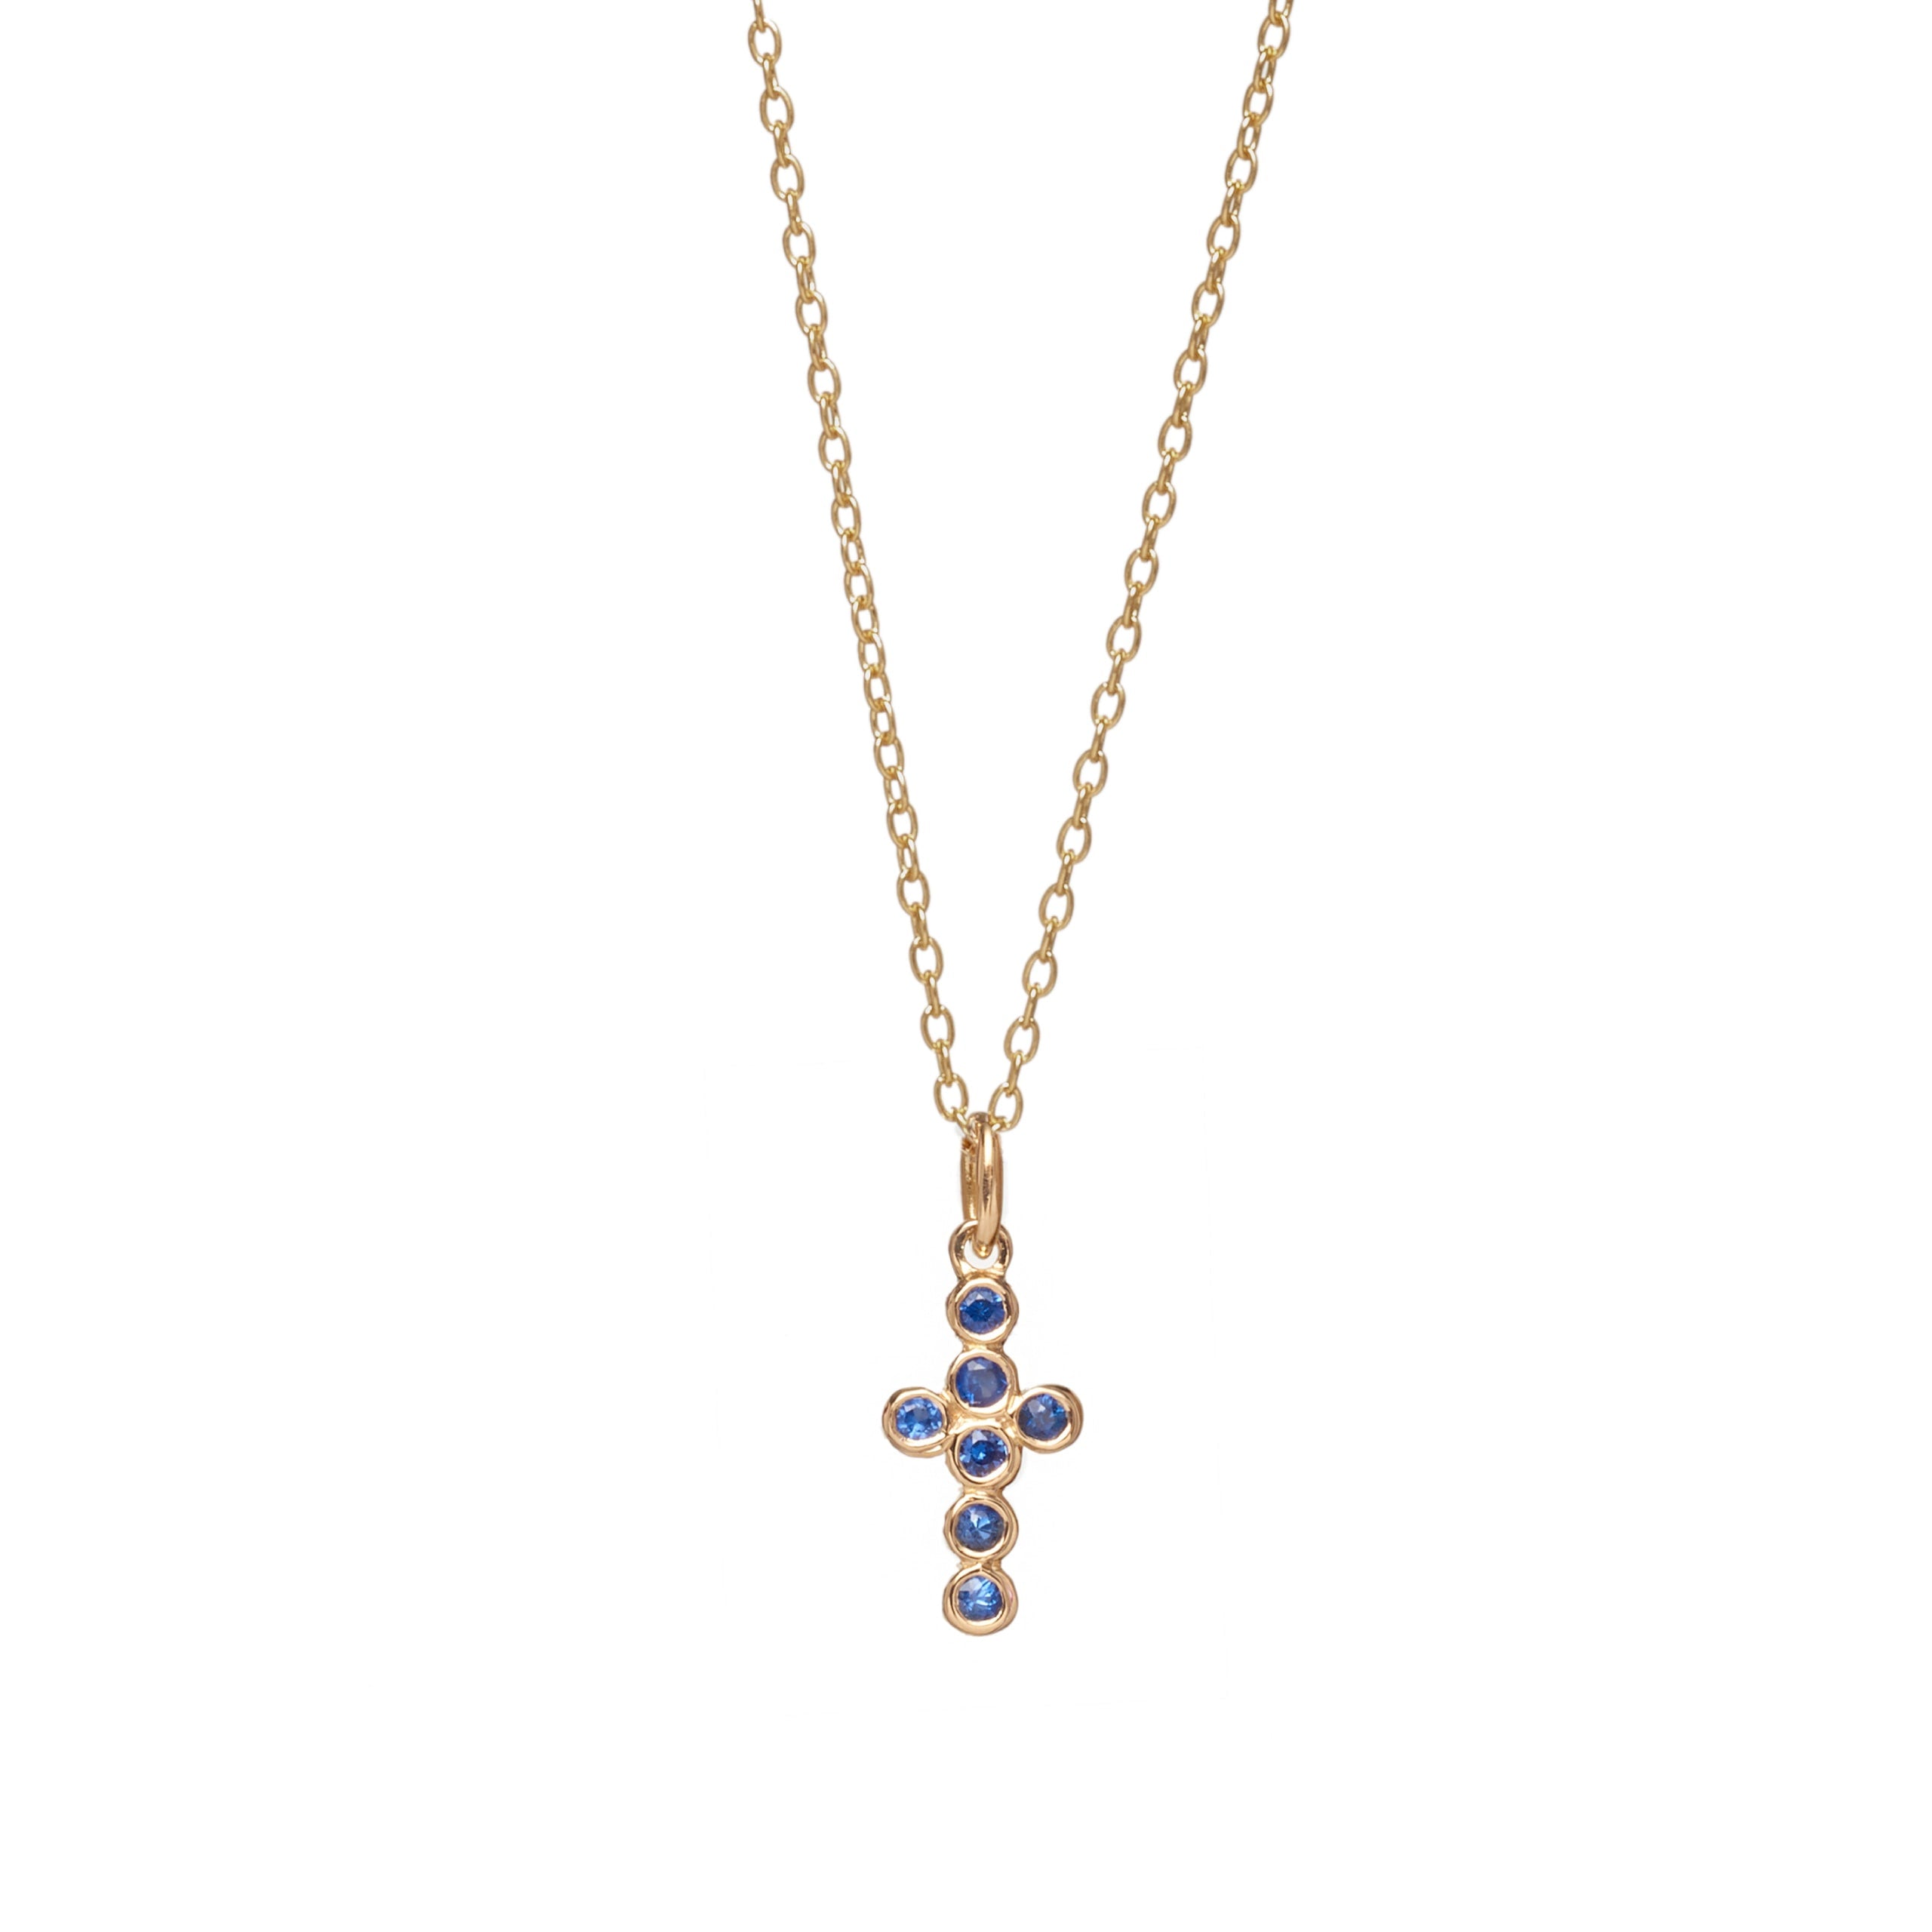 NECKLACE - SAPPHIRES